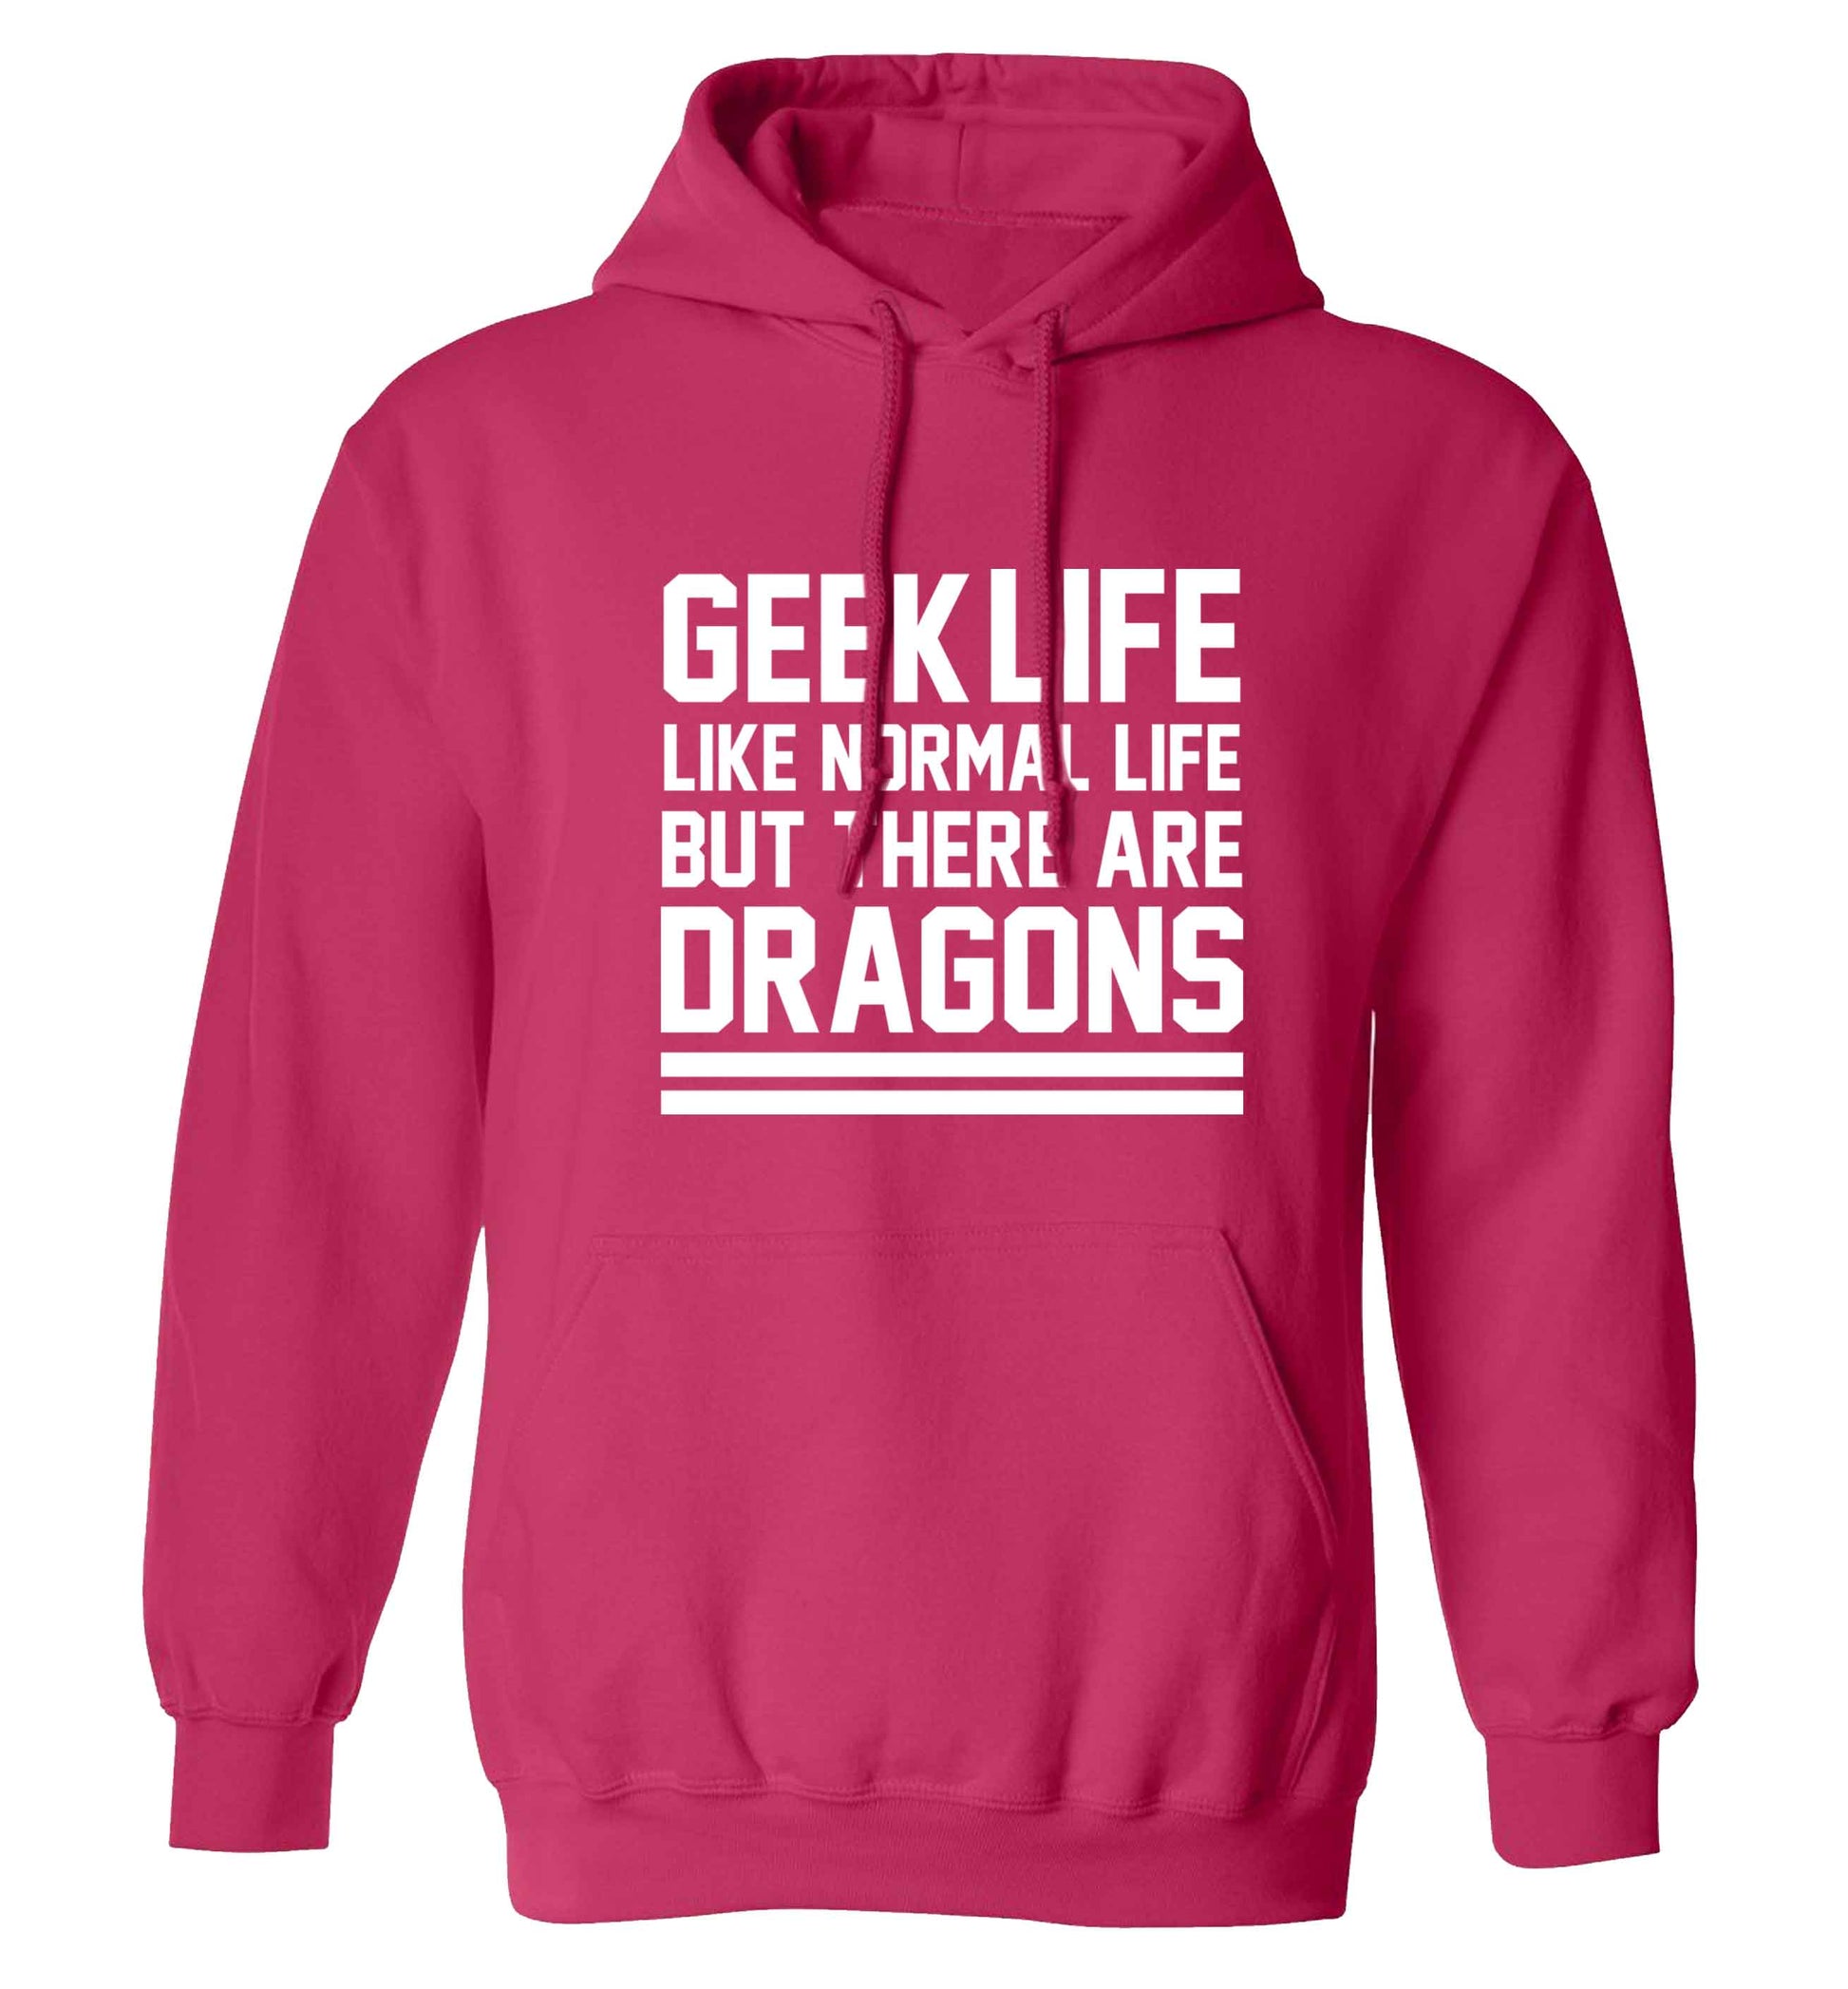 Geek life like normal life but there are dragons adults unisex pink hoodie 2XL